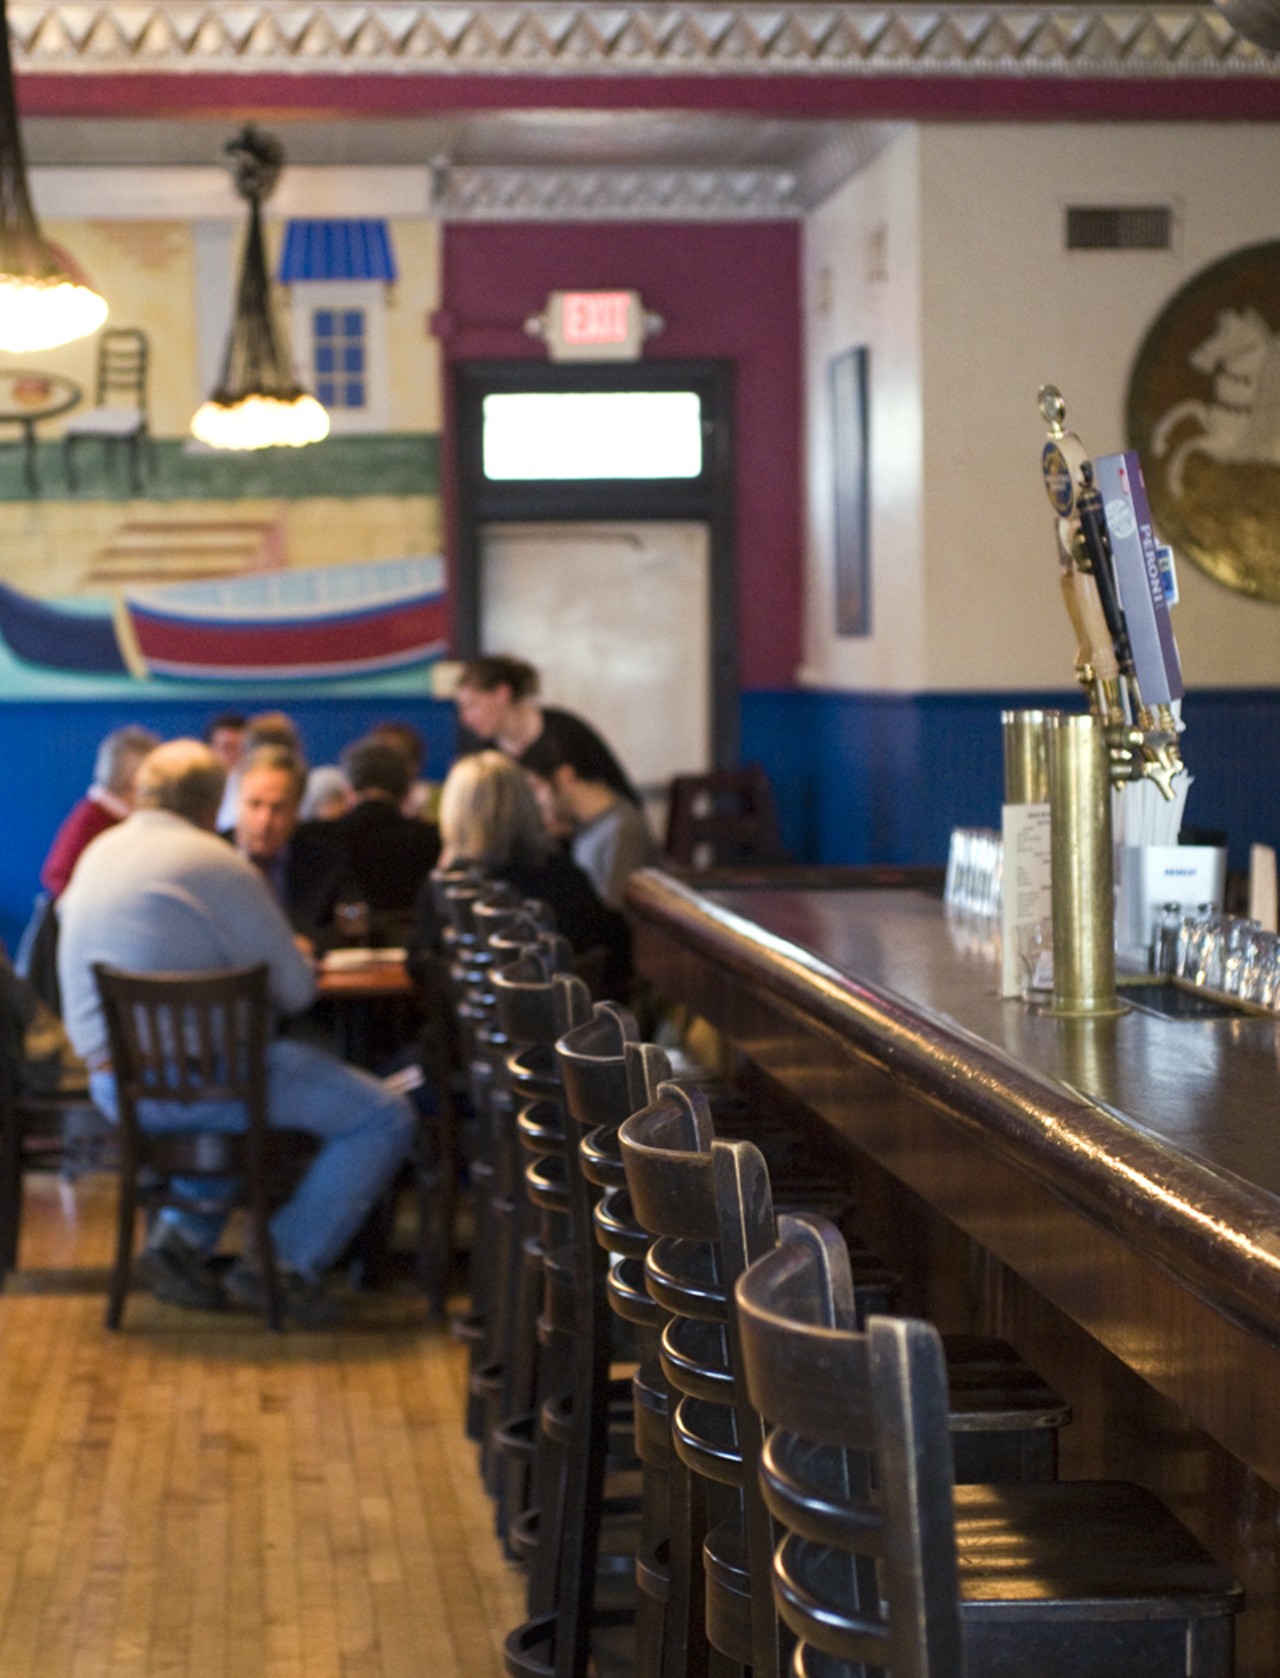 Anthonino&rsquo;s Taverna , formerly The Hill Bar & Grill, got it&rsquo;s start about 5-and-a-half years ago when the Scarato brothers bought it. They kept the original bar, hardwood floors and tin ceiling and then added their personal touches.